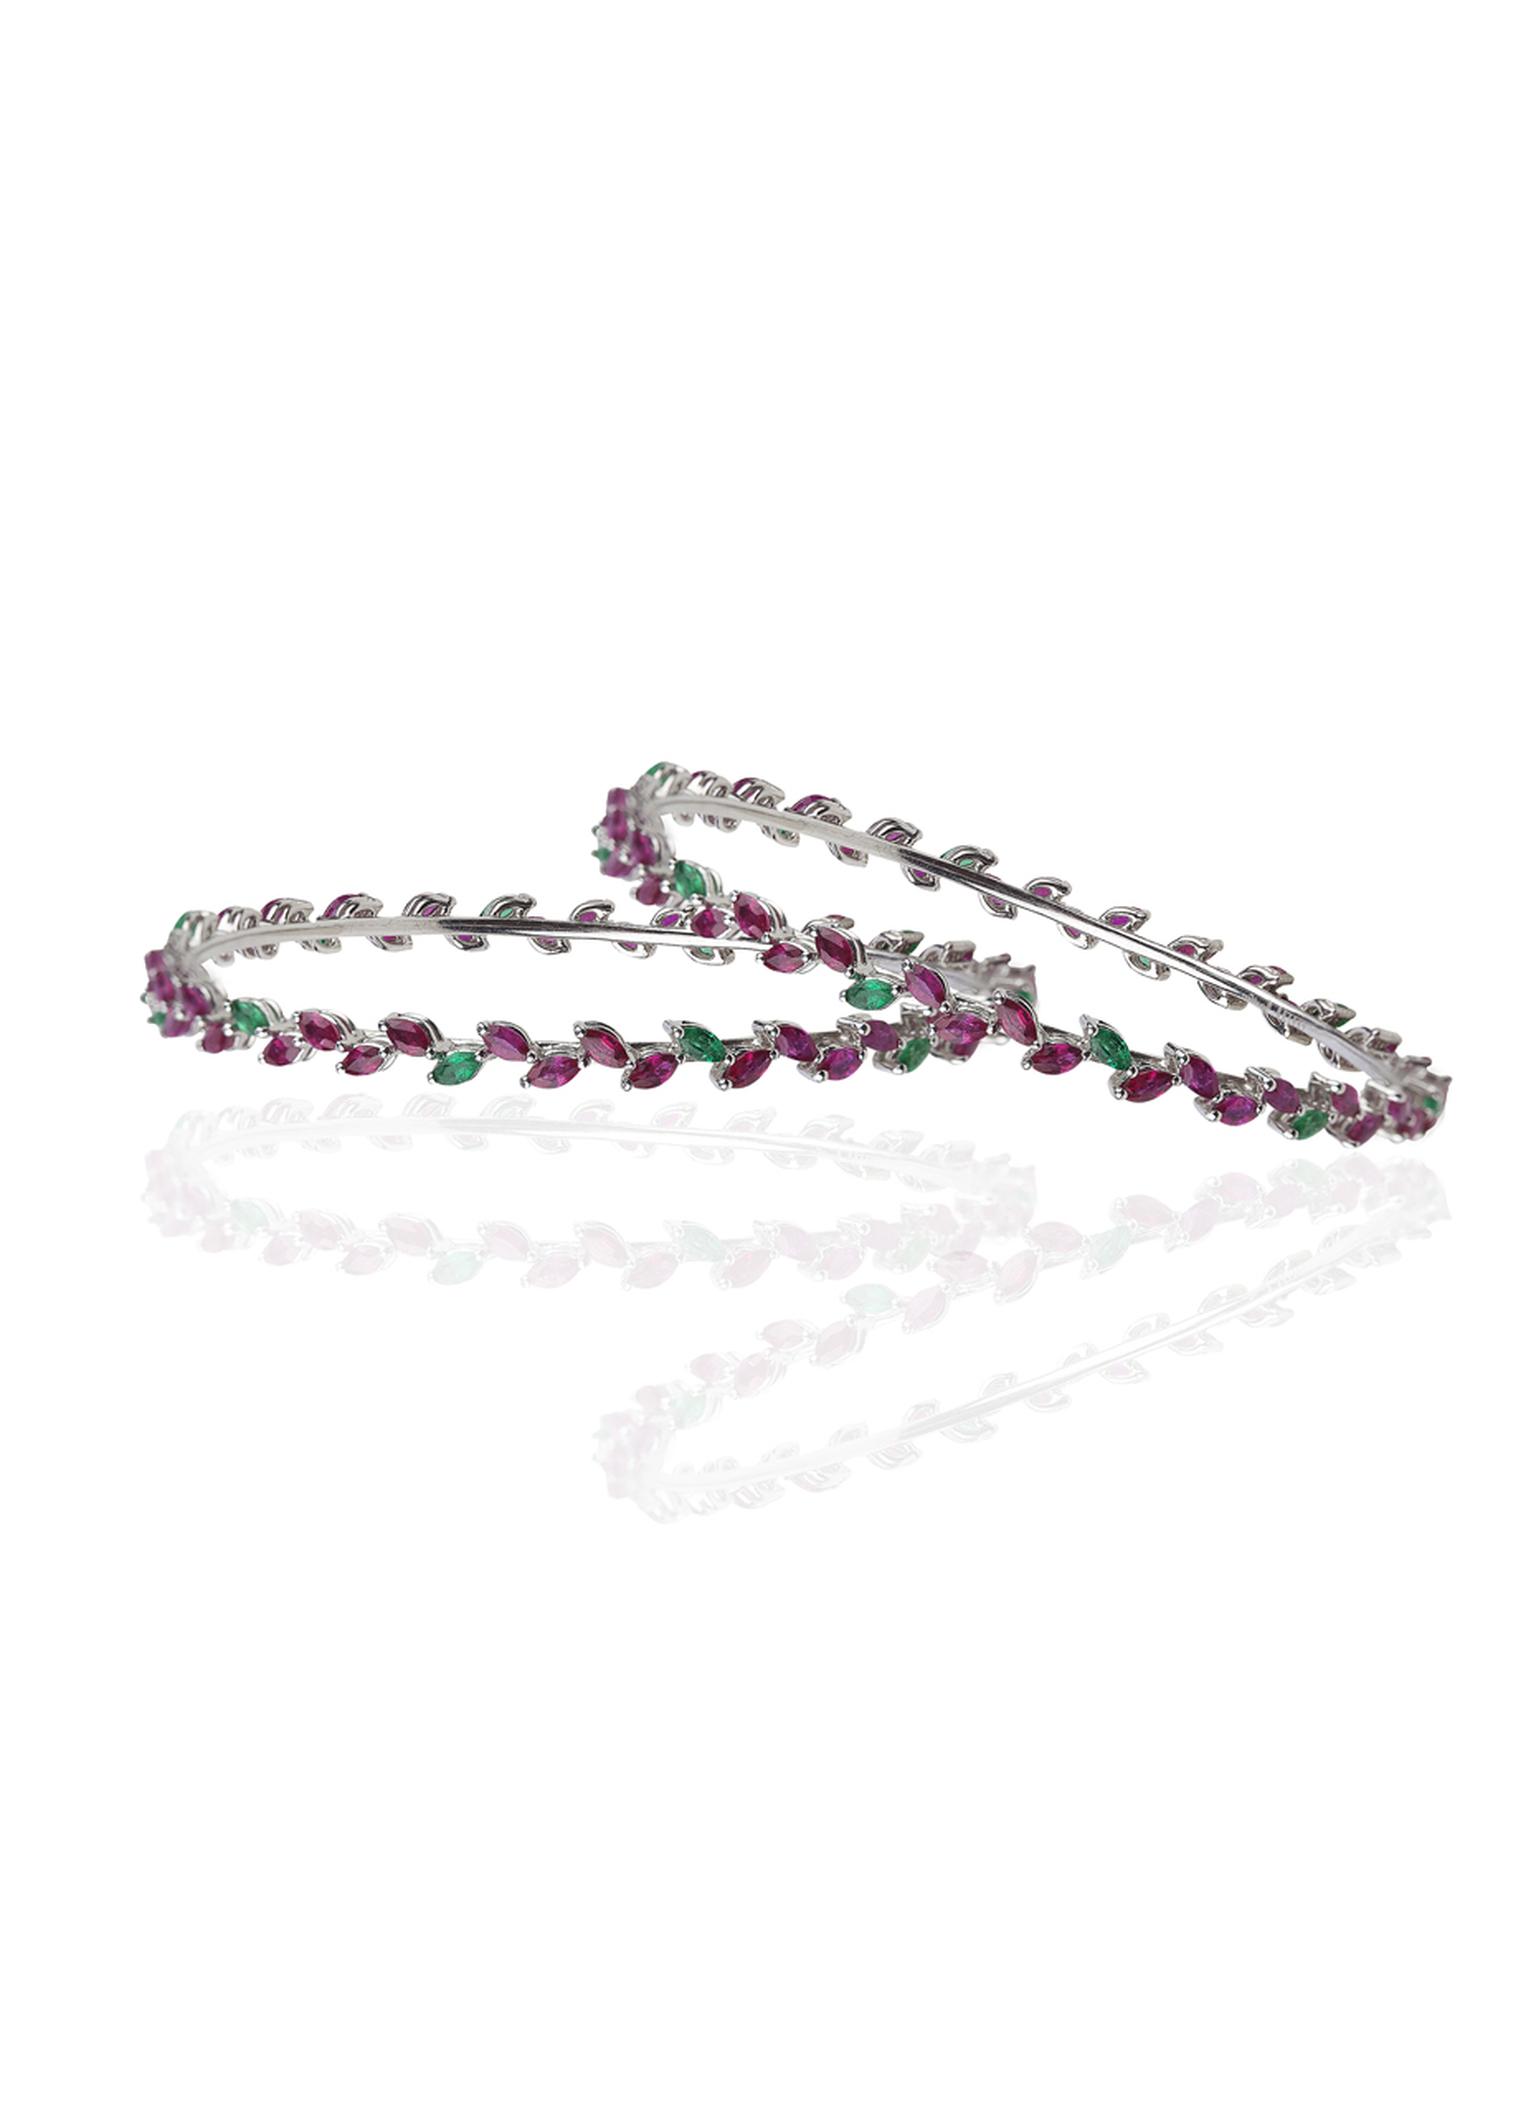 Mirari white gold bangles featuring marquise cut rubies and emeralds.